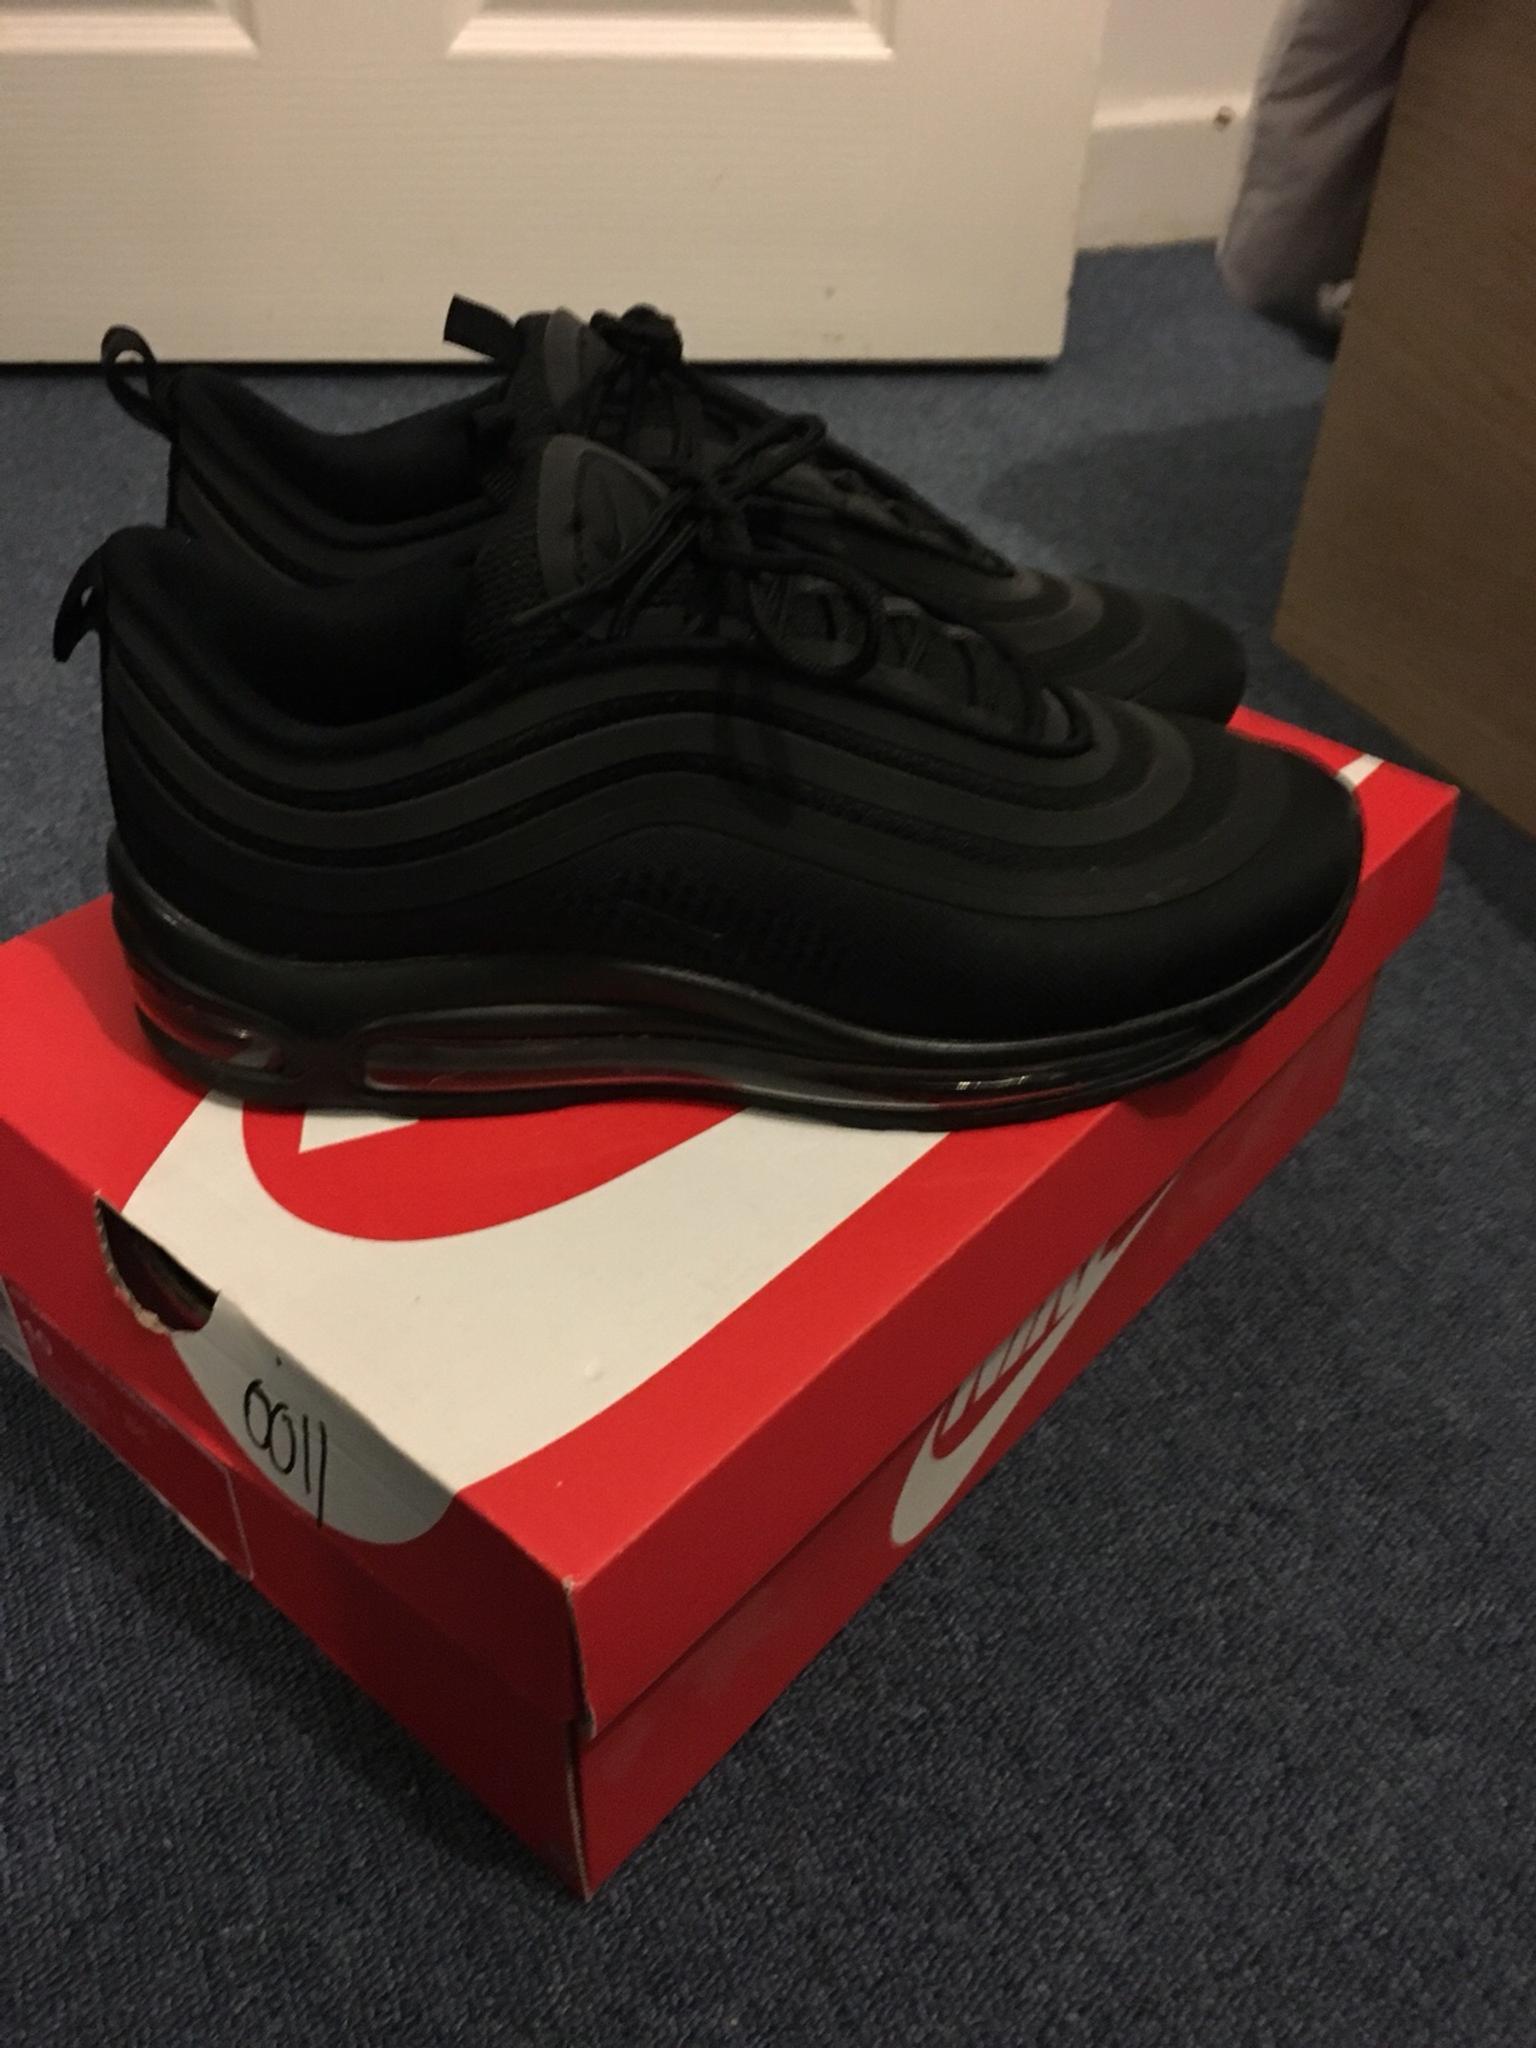 Nike Air Max 97 Athletic Shoes for Men for sale eBay